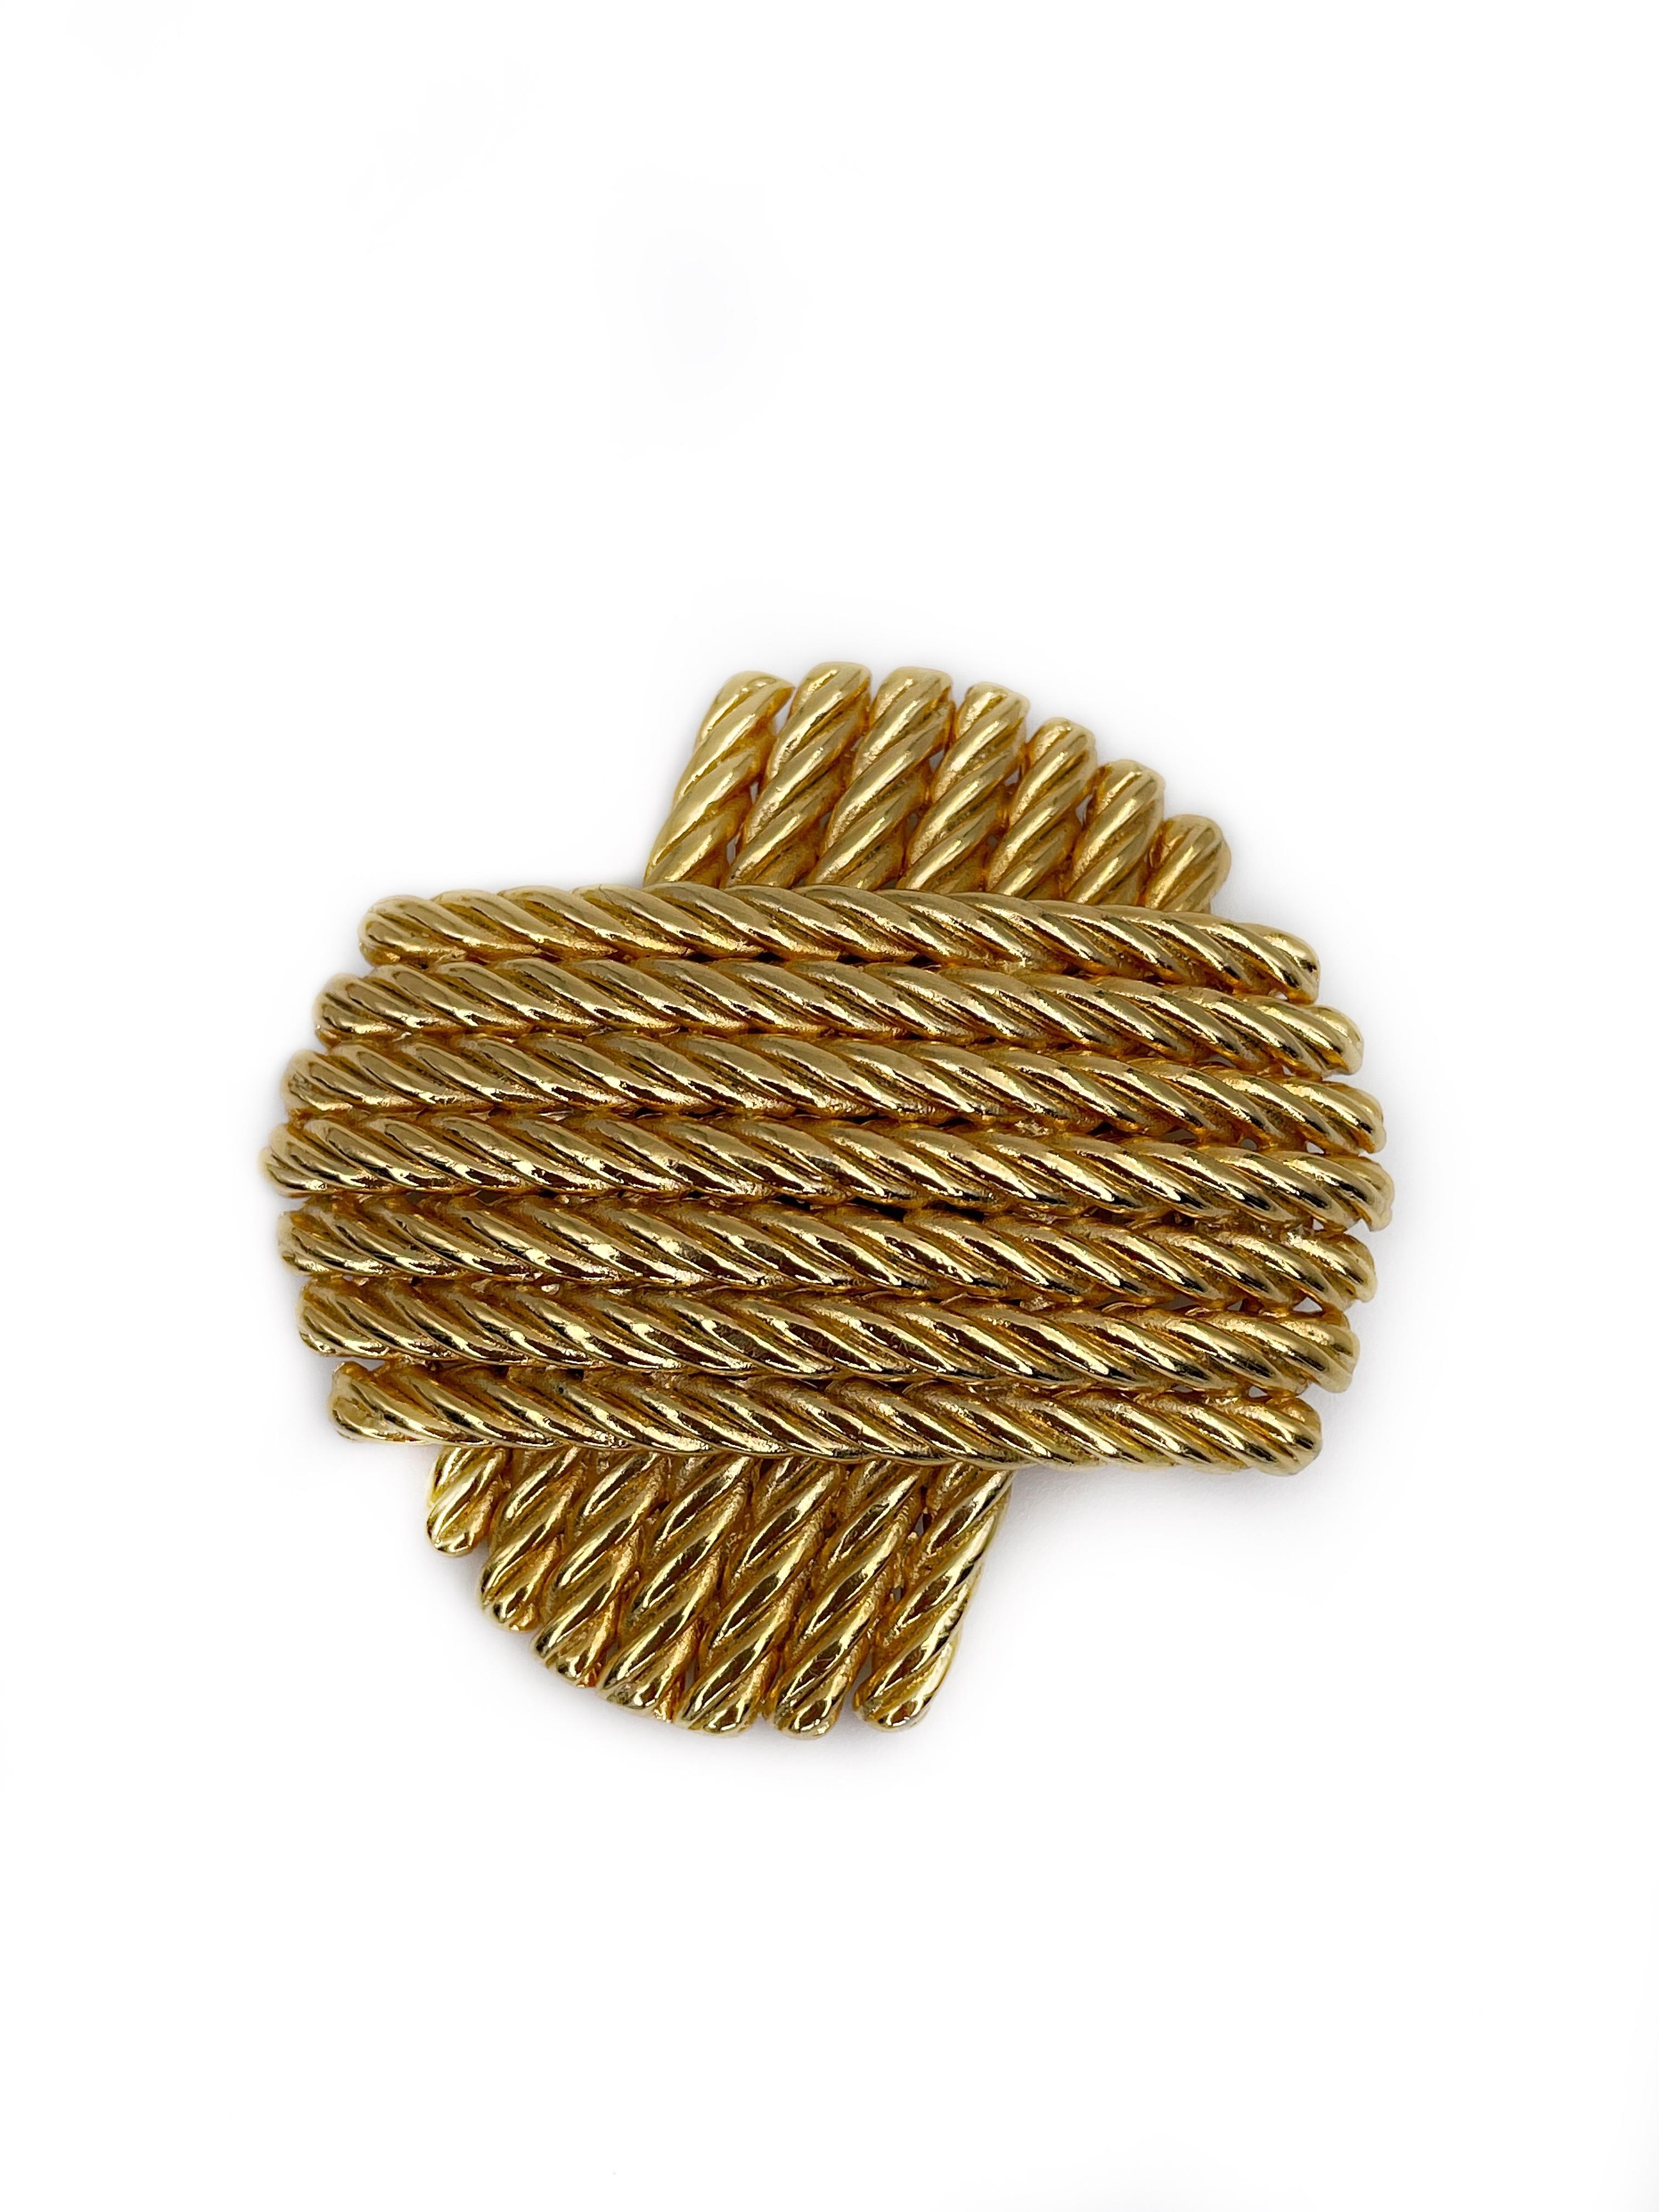 This is a rope design vintage brooch designed by Balenciaga in 1980’s. This piece is gold plated.

Signature: “BALENCIAGA - PARIS®” (shown in photos).

Size: 5x4.5cm